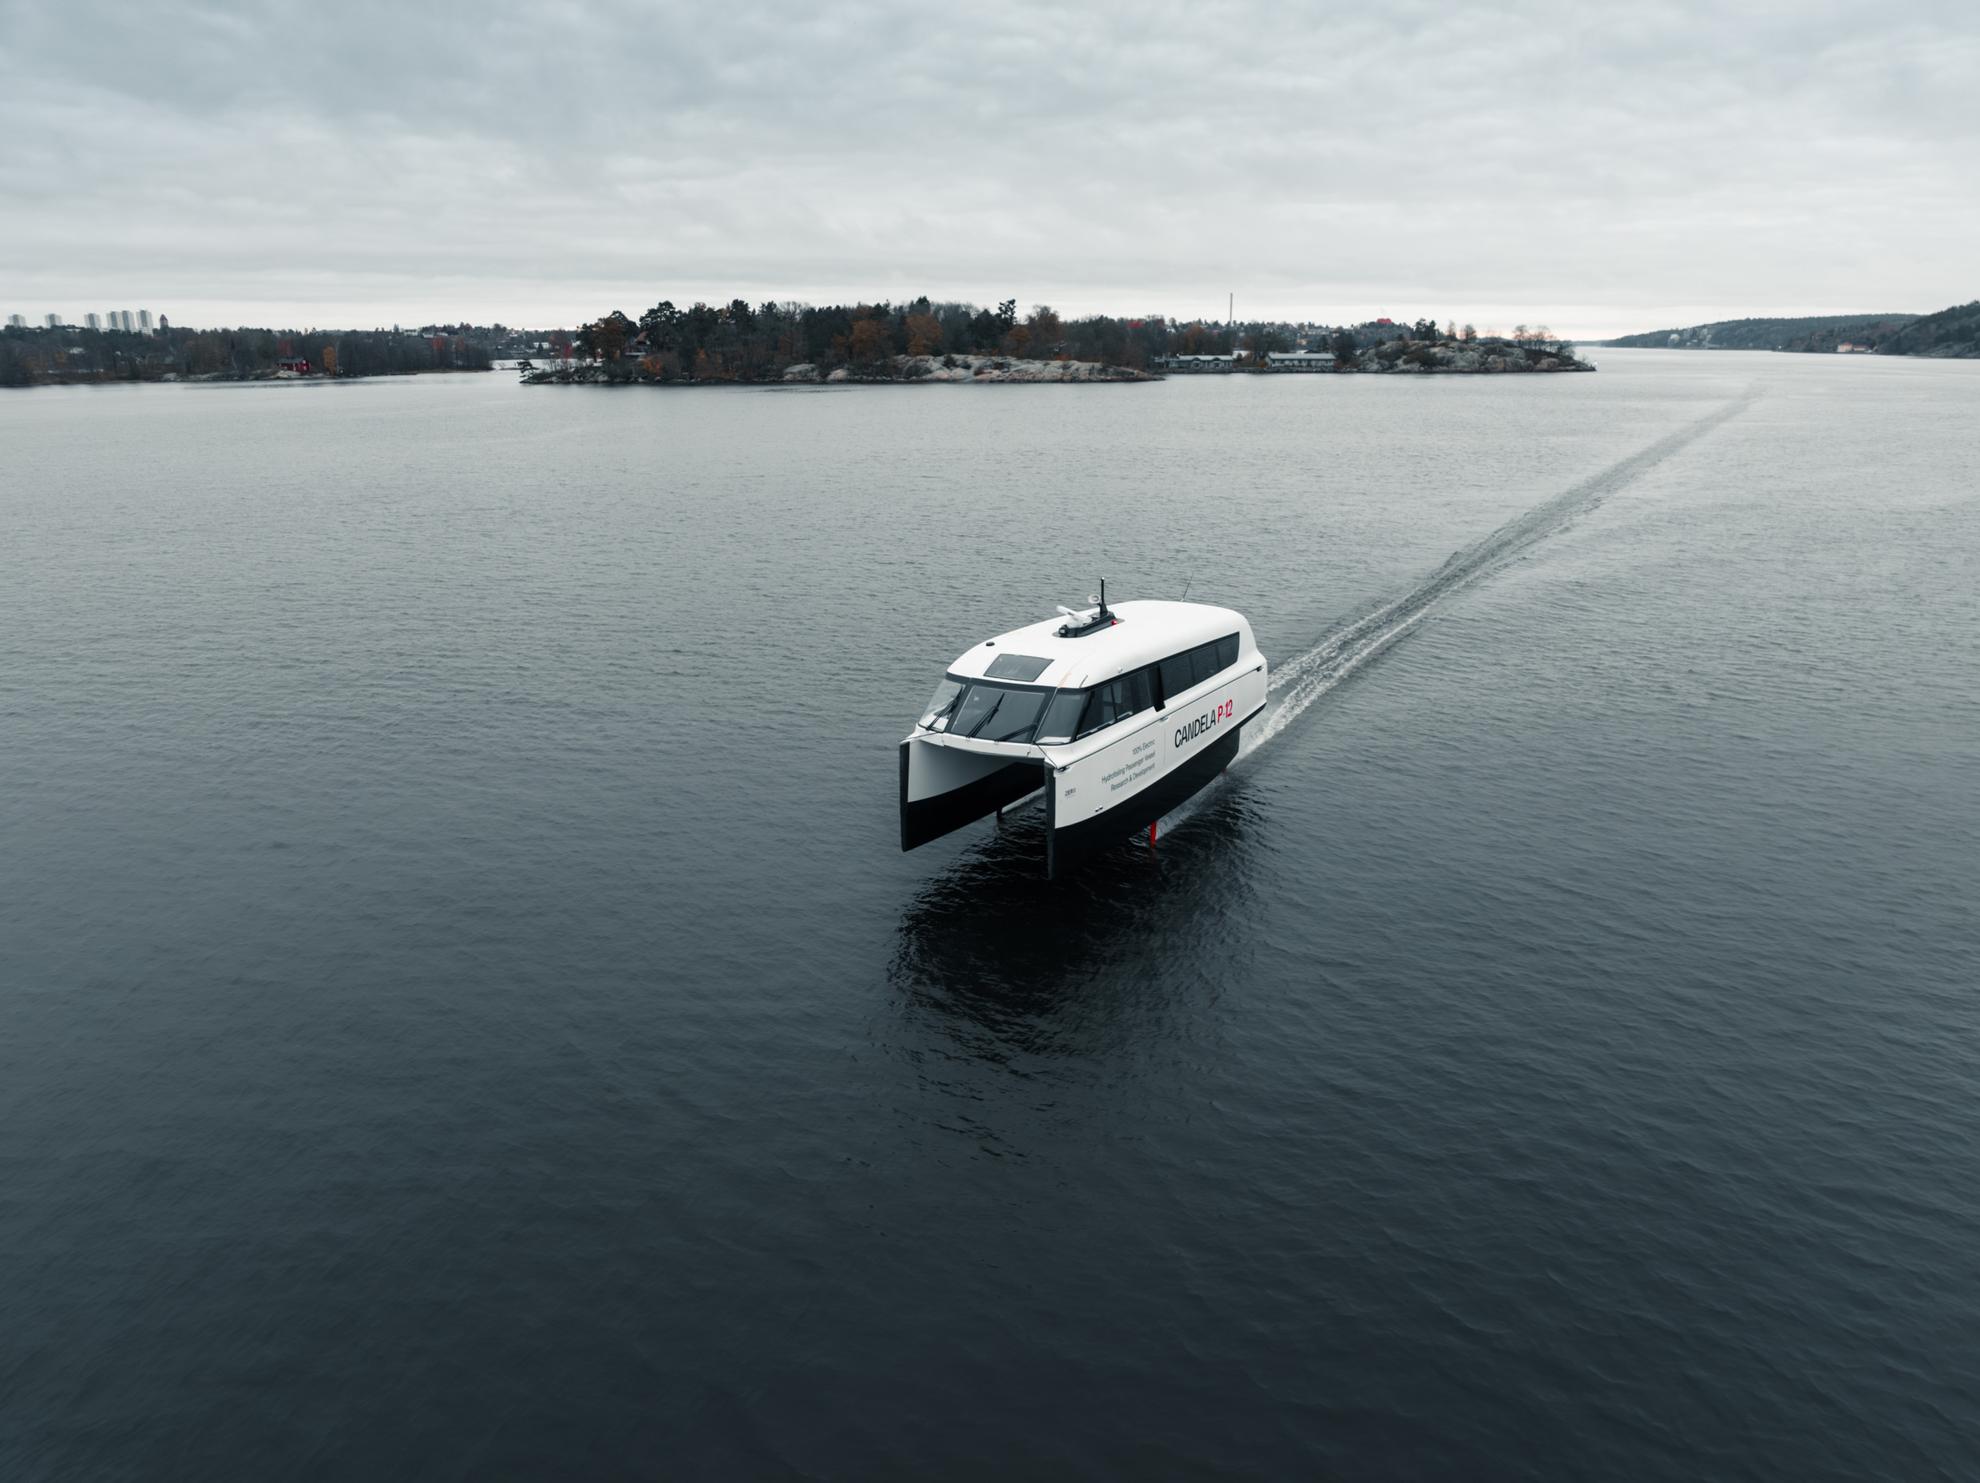 The white and black ferry Candela P-12 Shuttle travels on the water in the archipelago.